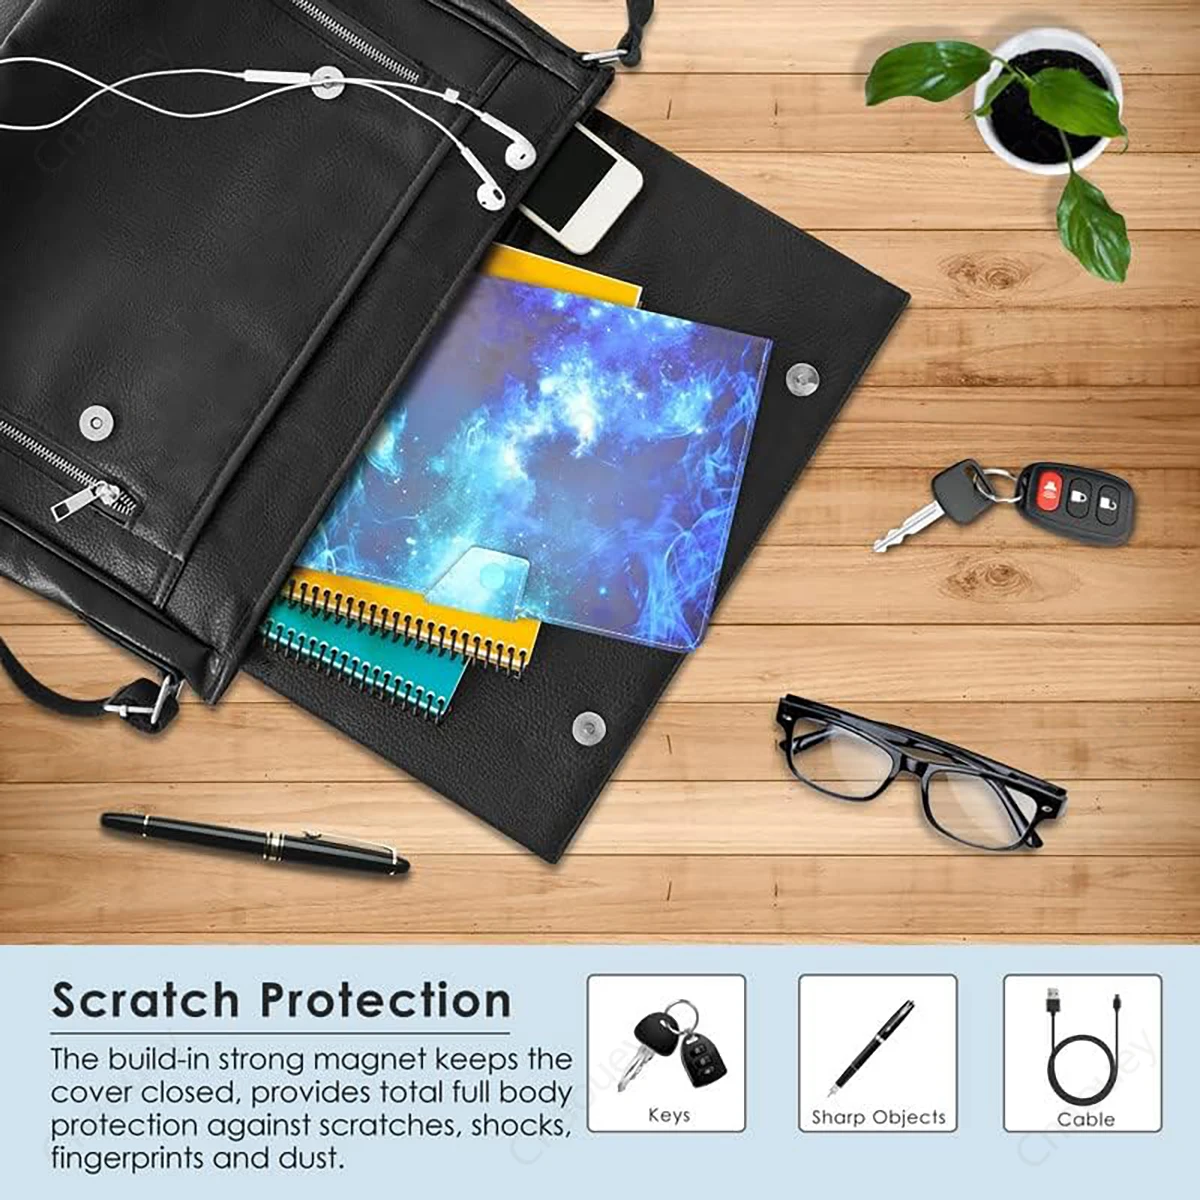 Universal Tablet Case for 9.4-10.1 inch Android IOS Windows,PU Leather Folio Stand Case for IPad Samsung Lenovo Teclast Funda